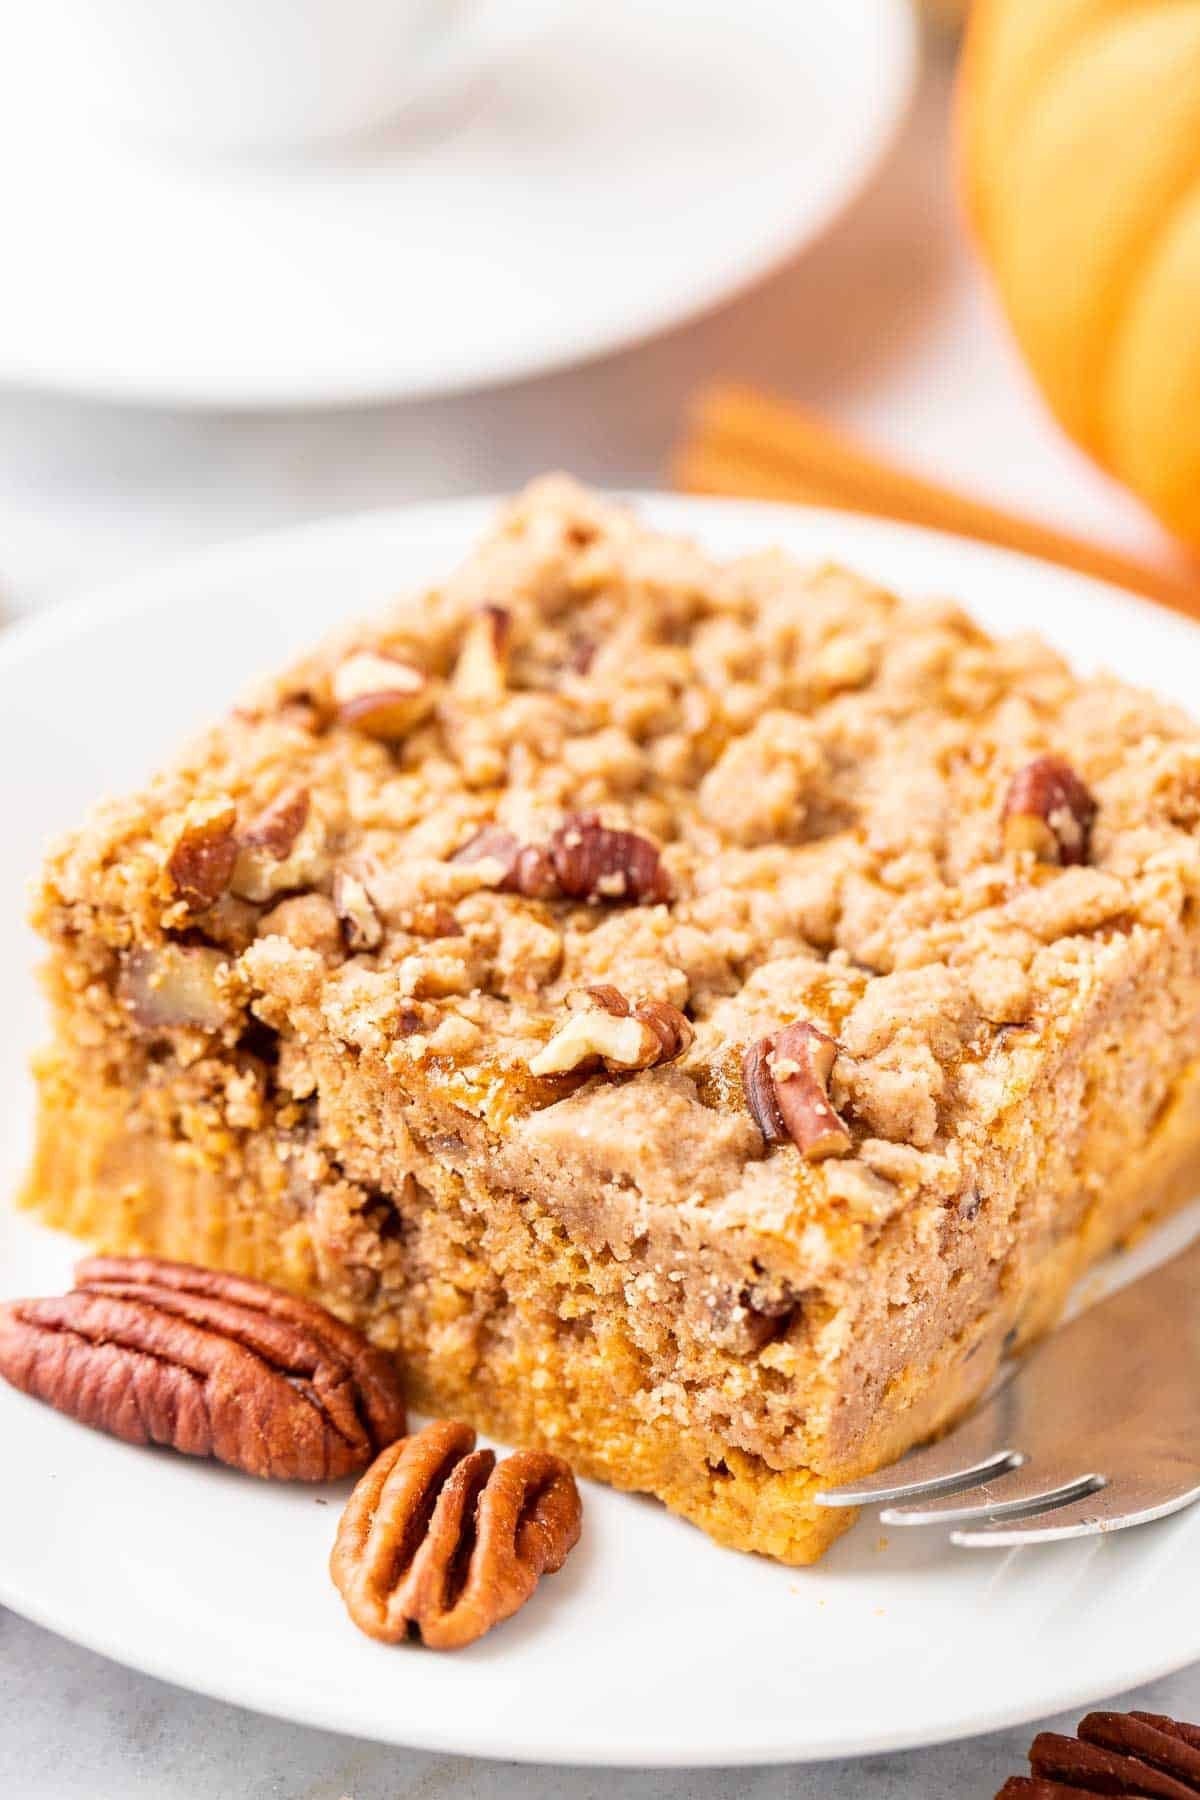 A piece of pumpkin cake with pecans on a white plate with a fork, garnished with whole pecans, cinnamon sticks and pumpkin.